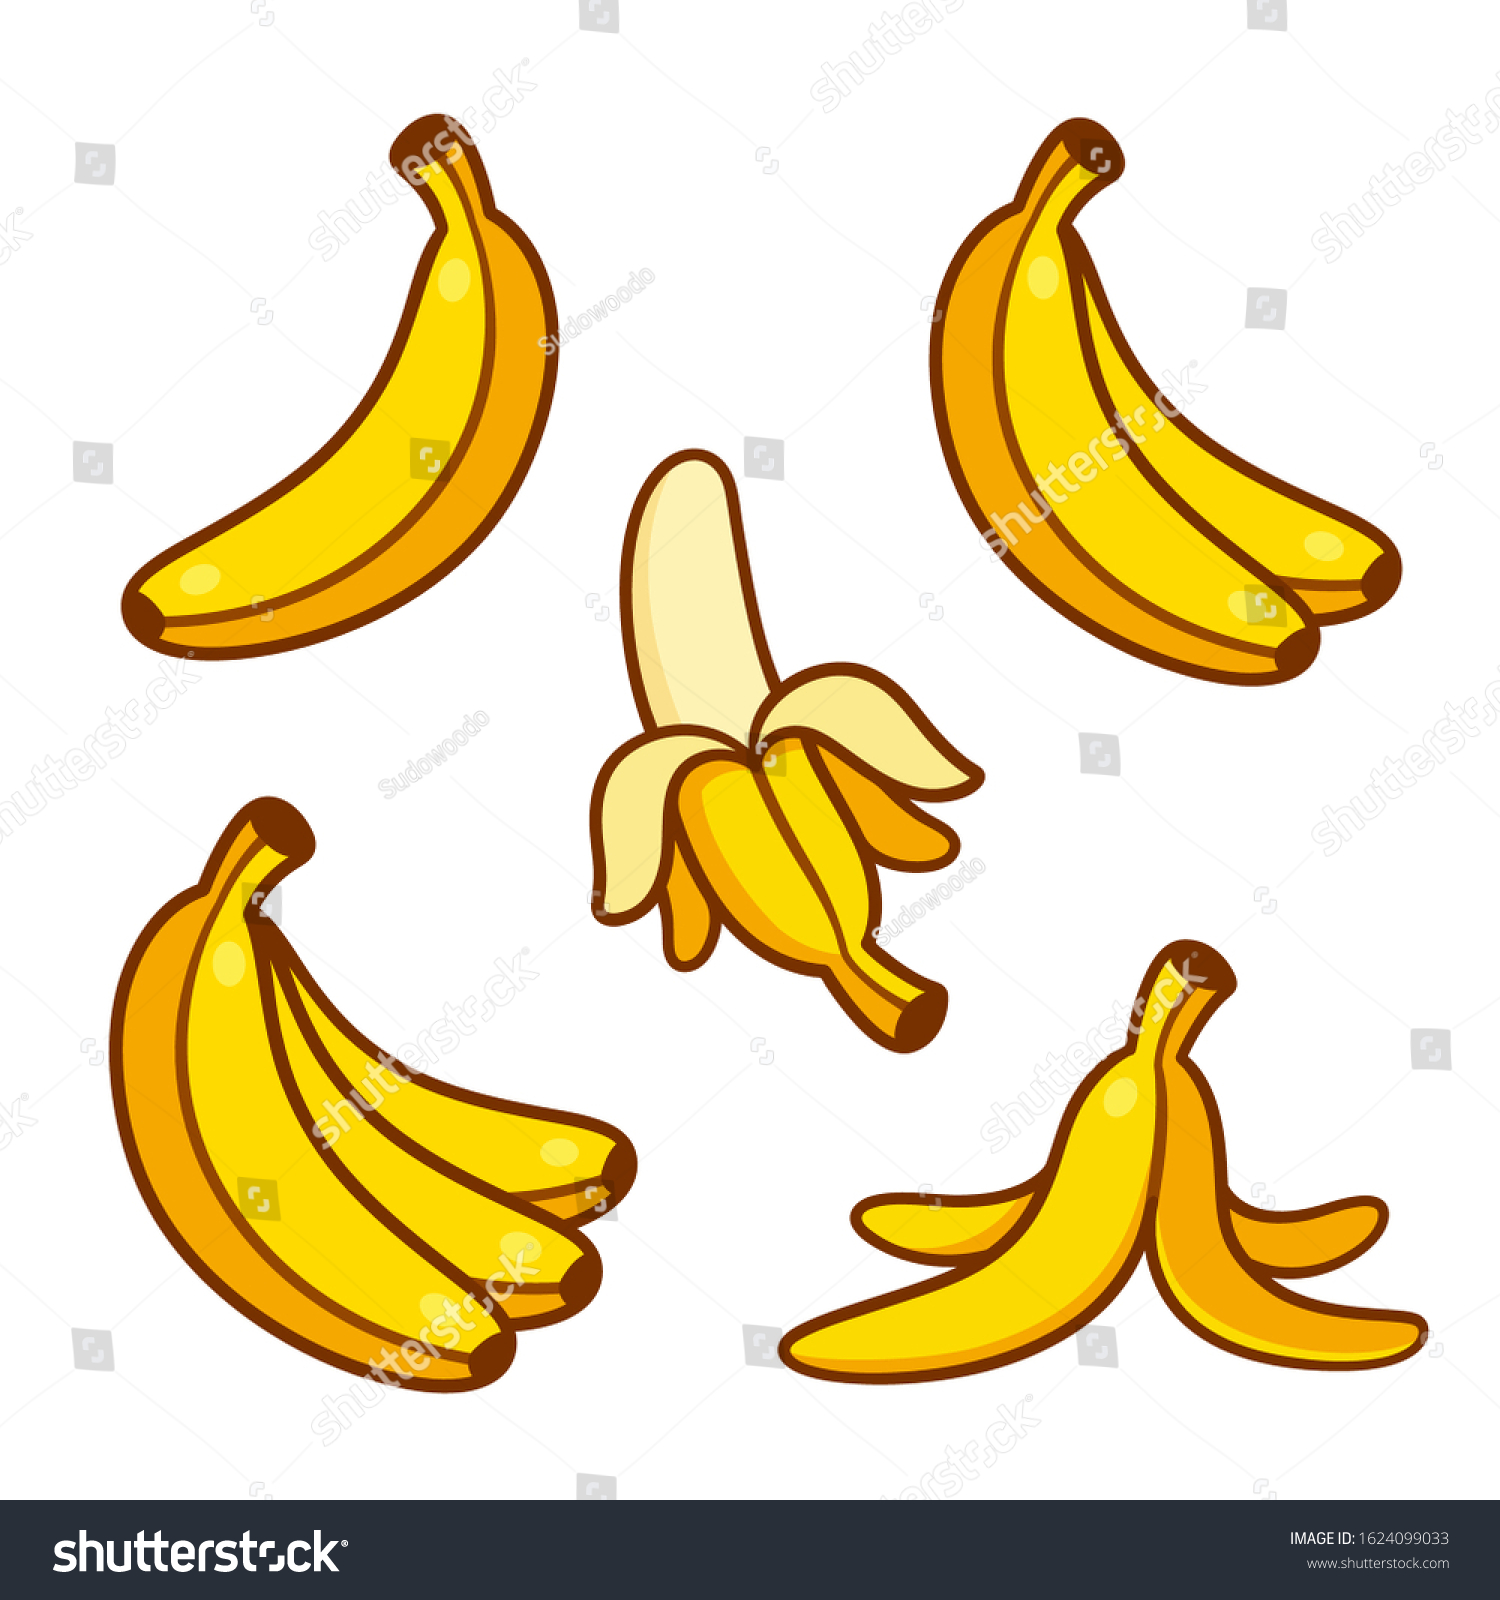 Set of cartoon banana drawings: single and bunch, peeled banana and empty peel on the ground. Vector clip art illustration collection. #1624099033